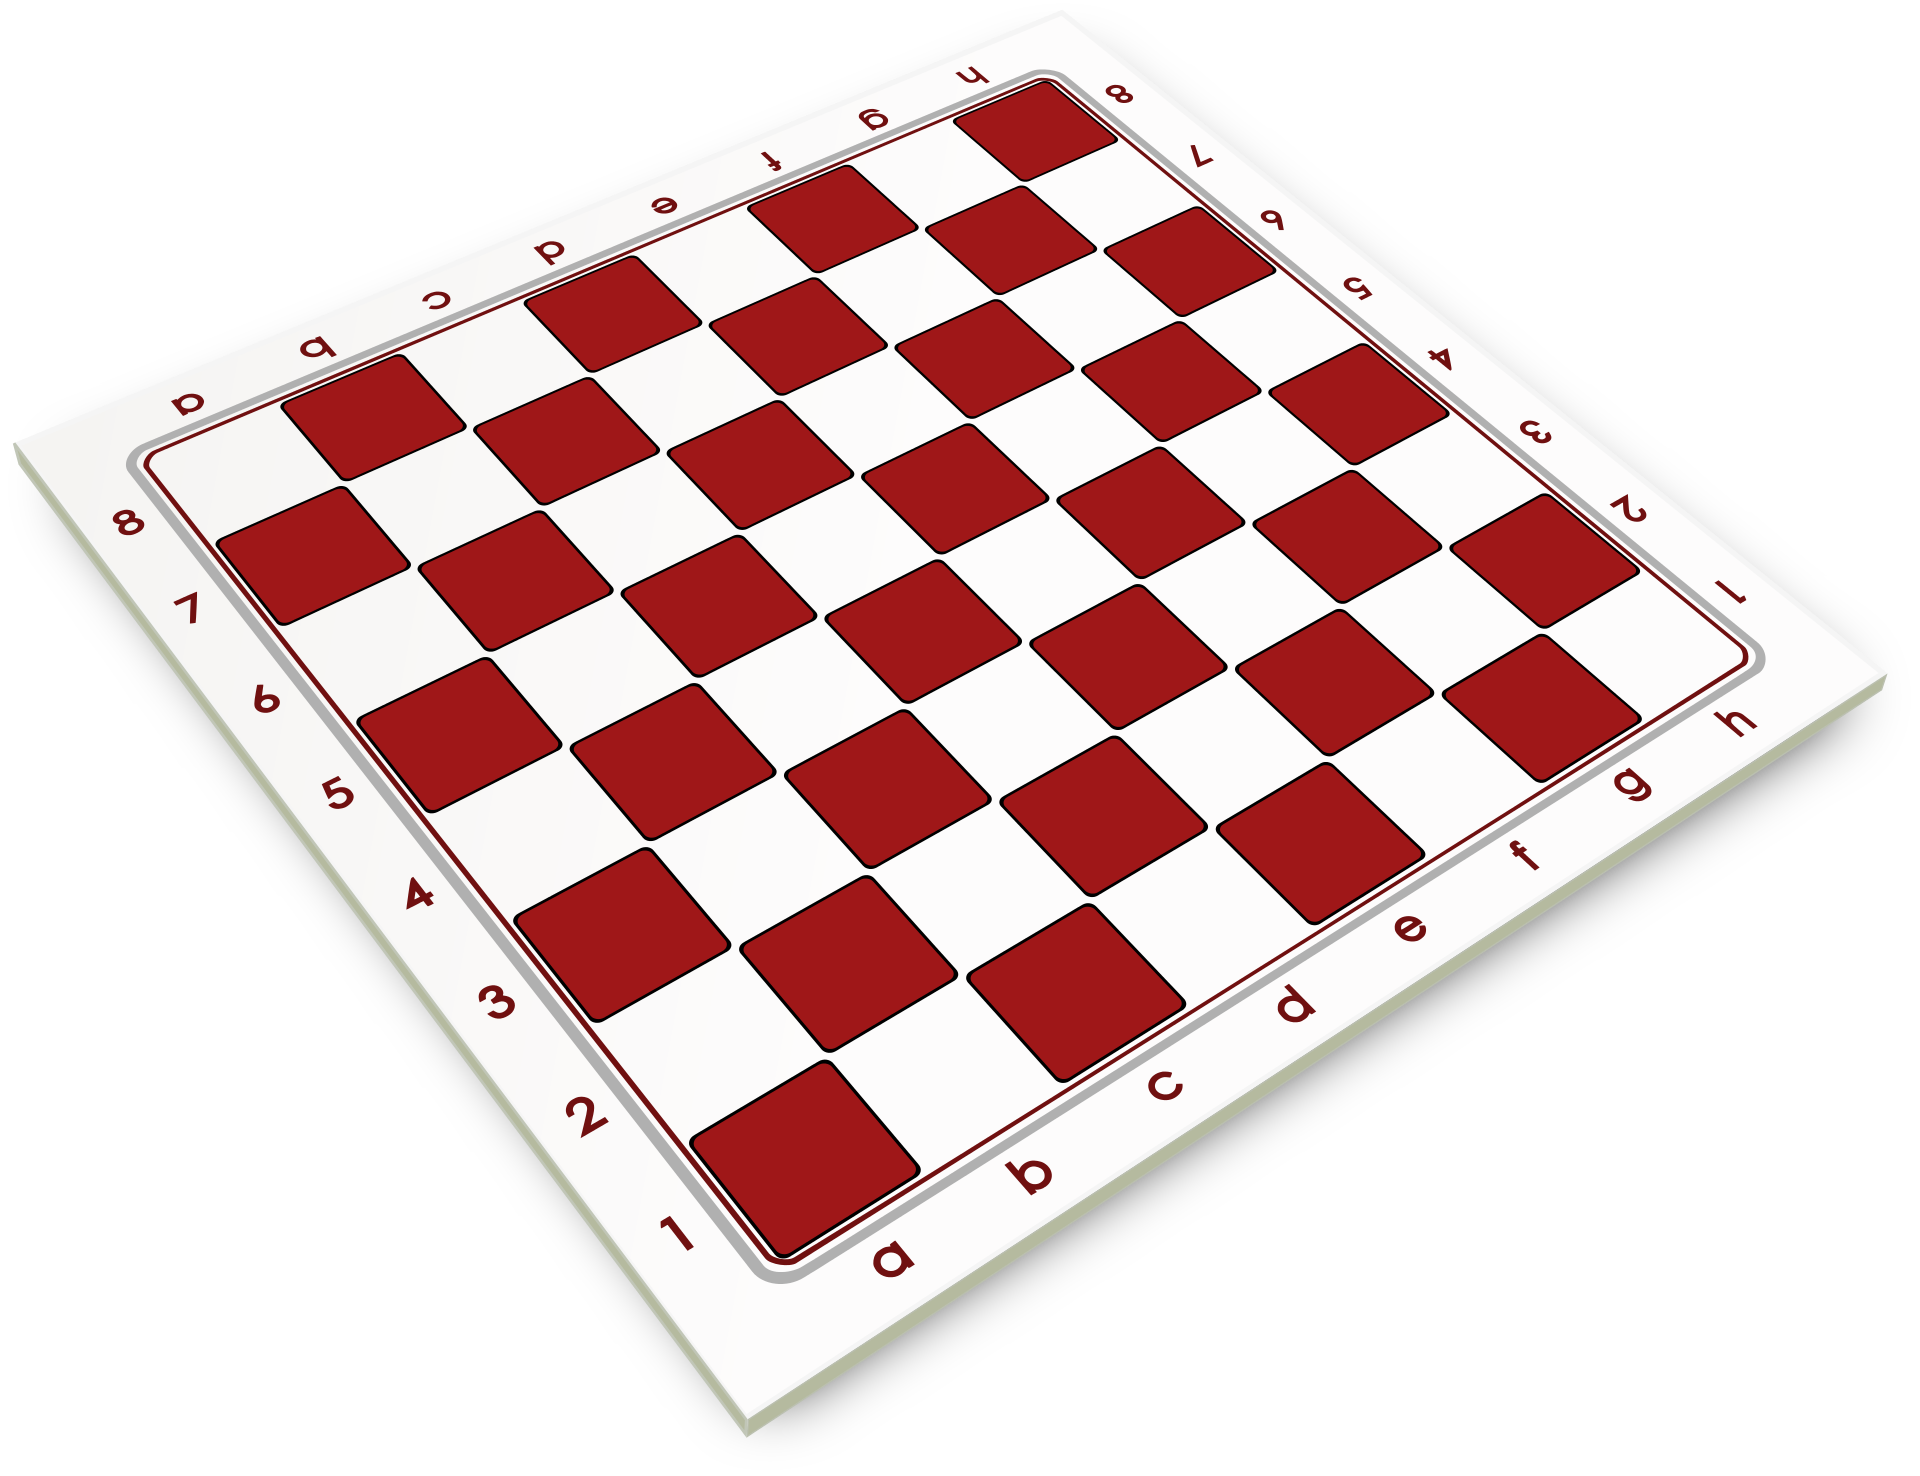 Chessboard as a metaphor for making disciples